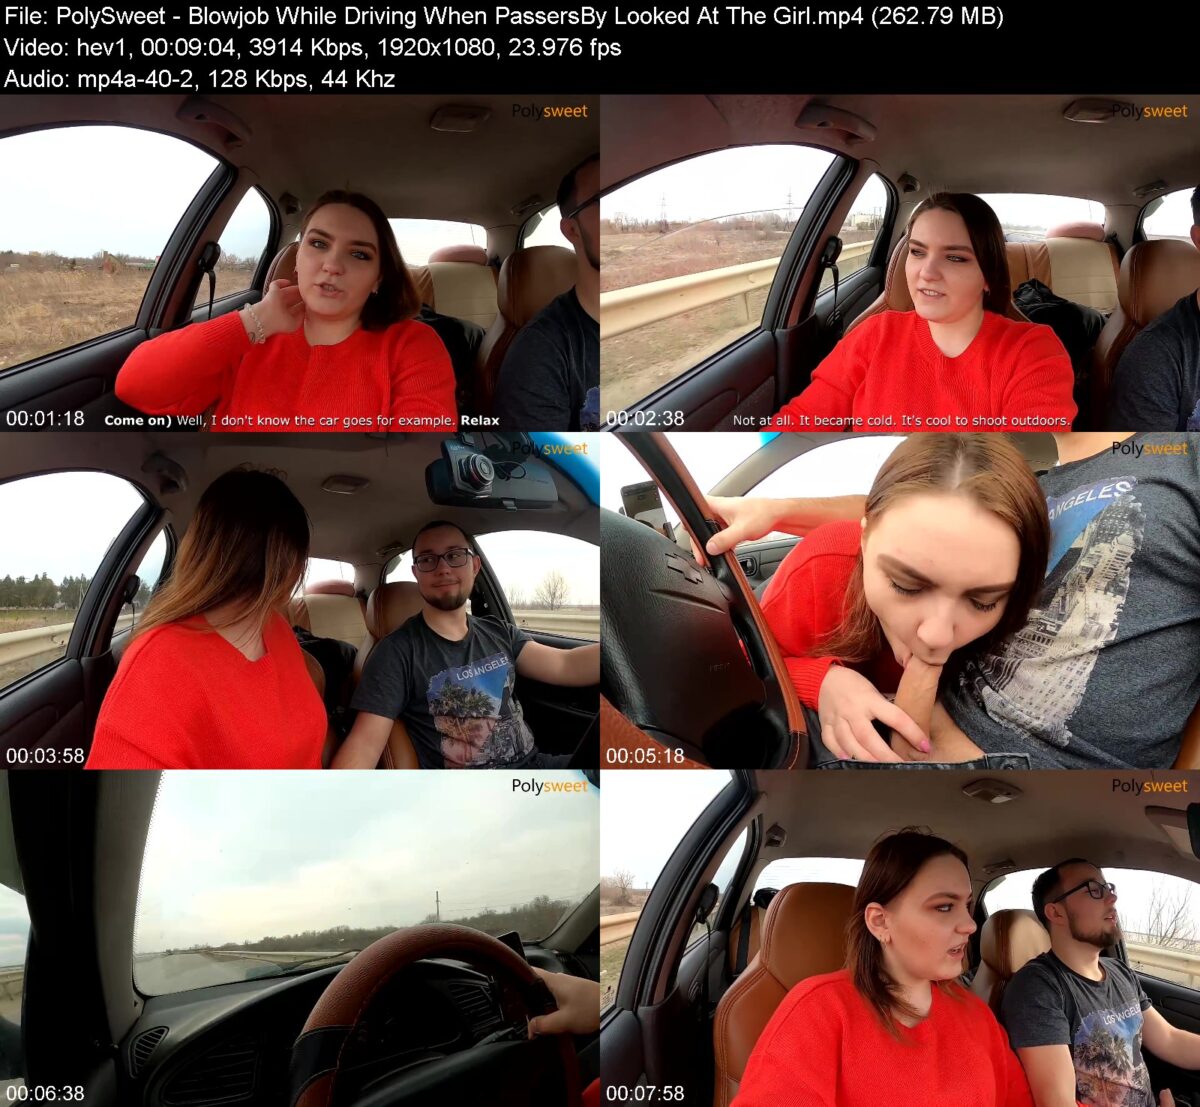 Actress: PolySweet. Title and Studio: Blowjob While Driving When PassersBy Looked At The Girl